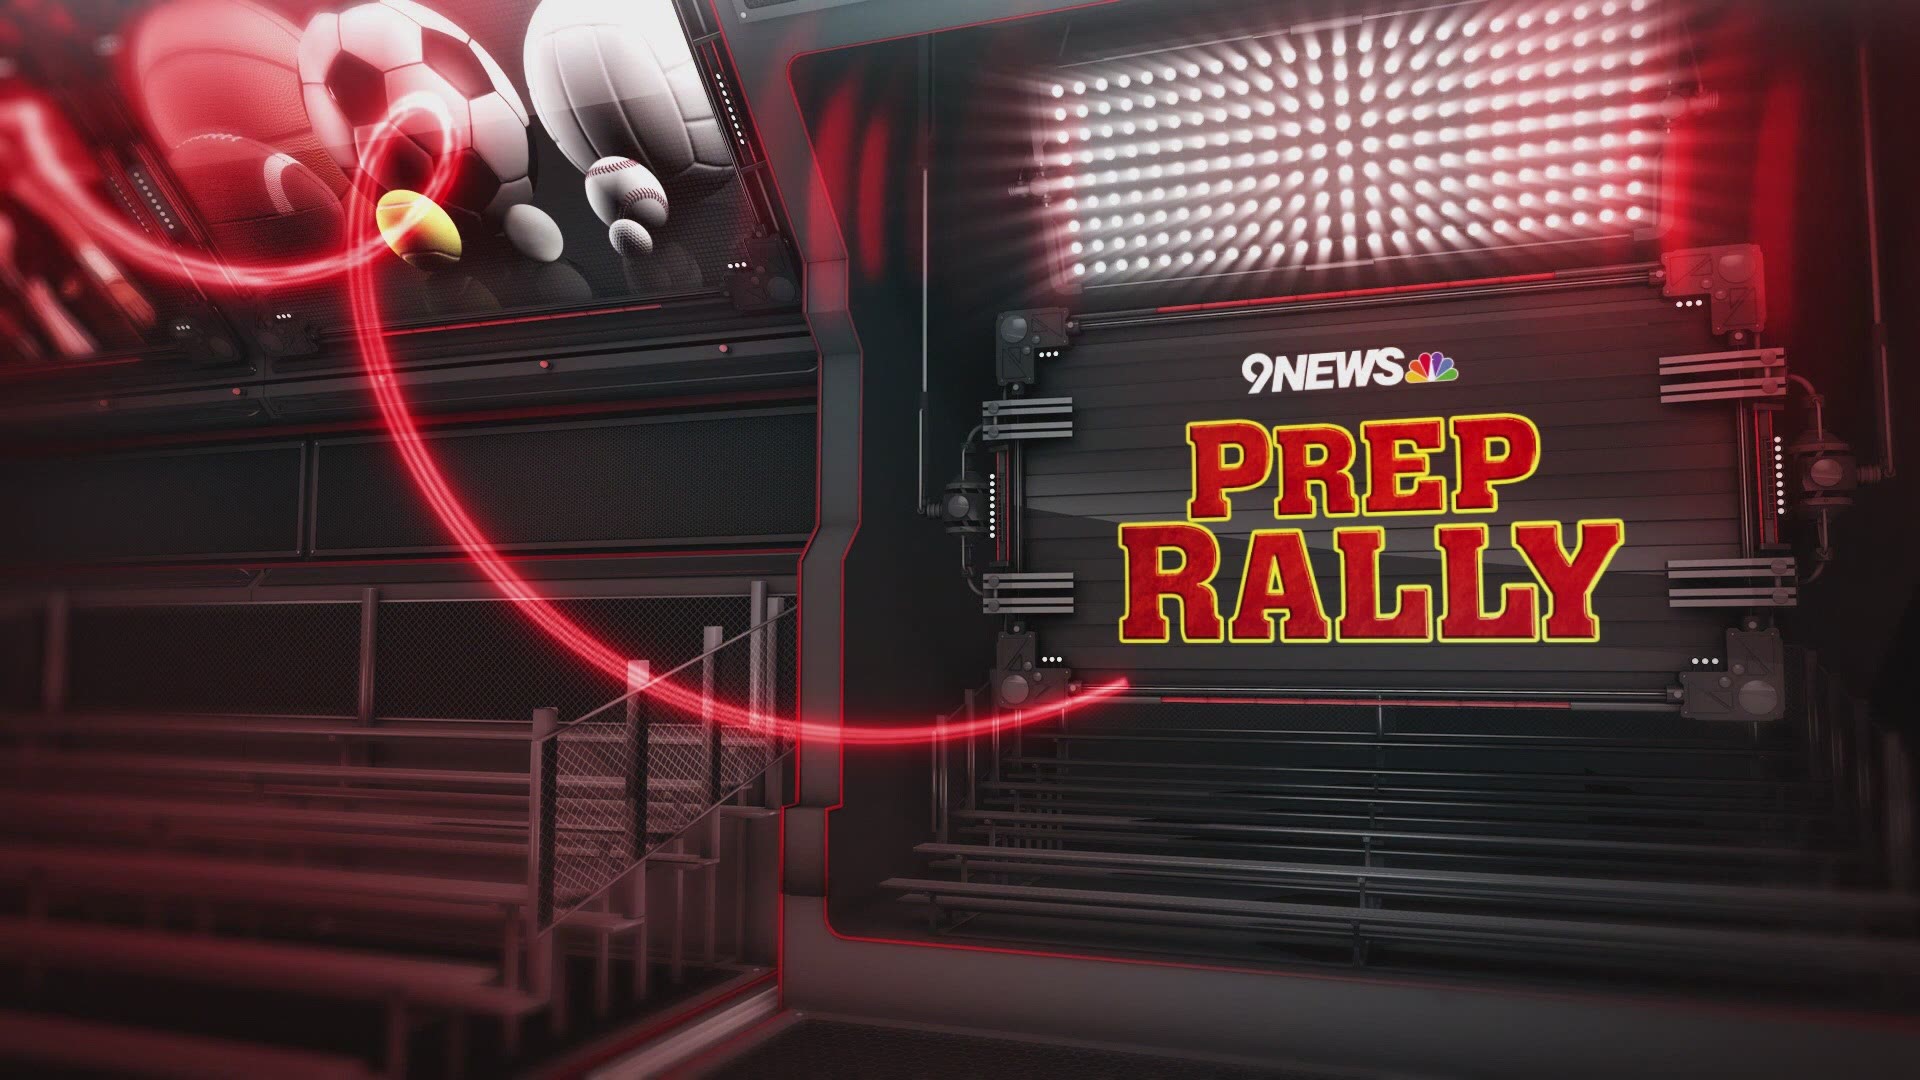 Catch up on the latest high school sports news with the 9NEWS Prep Rally!